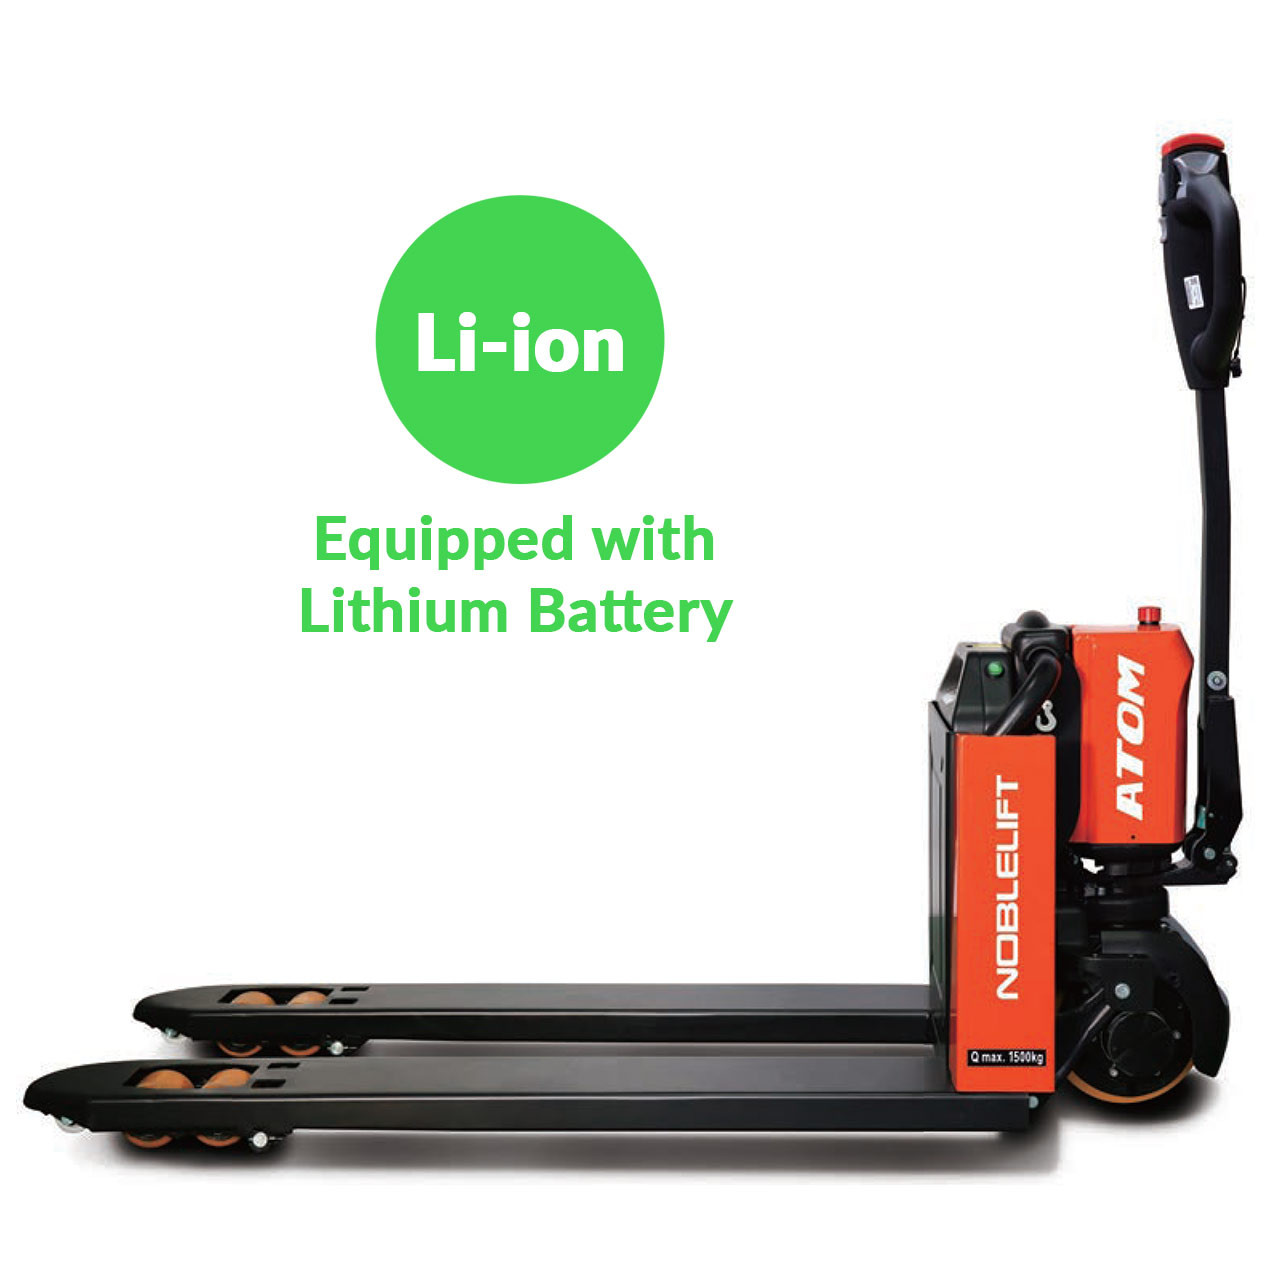 ATOM 28 Electric Pallet Jack is equipped with a lithium battery